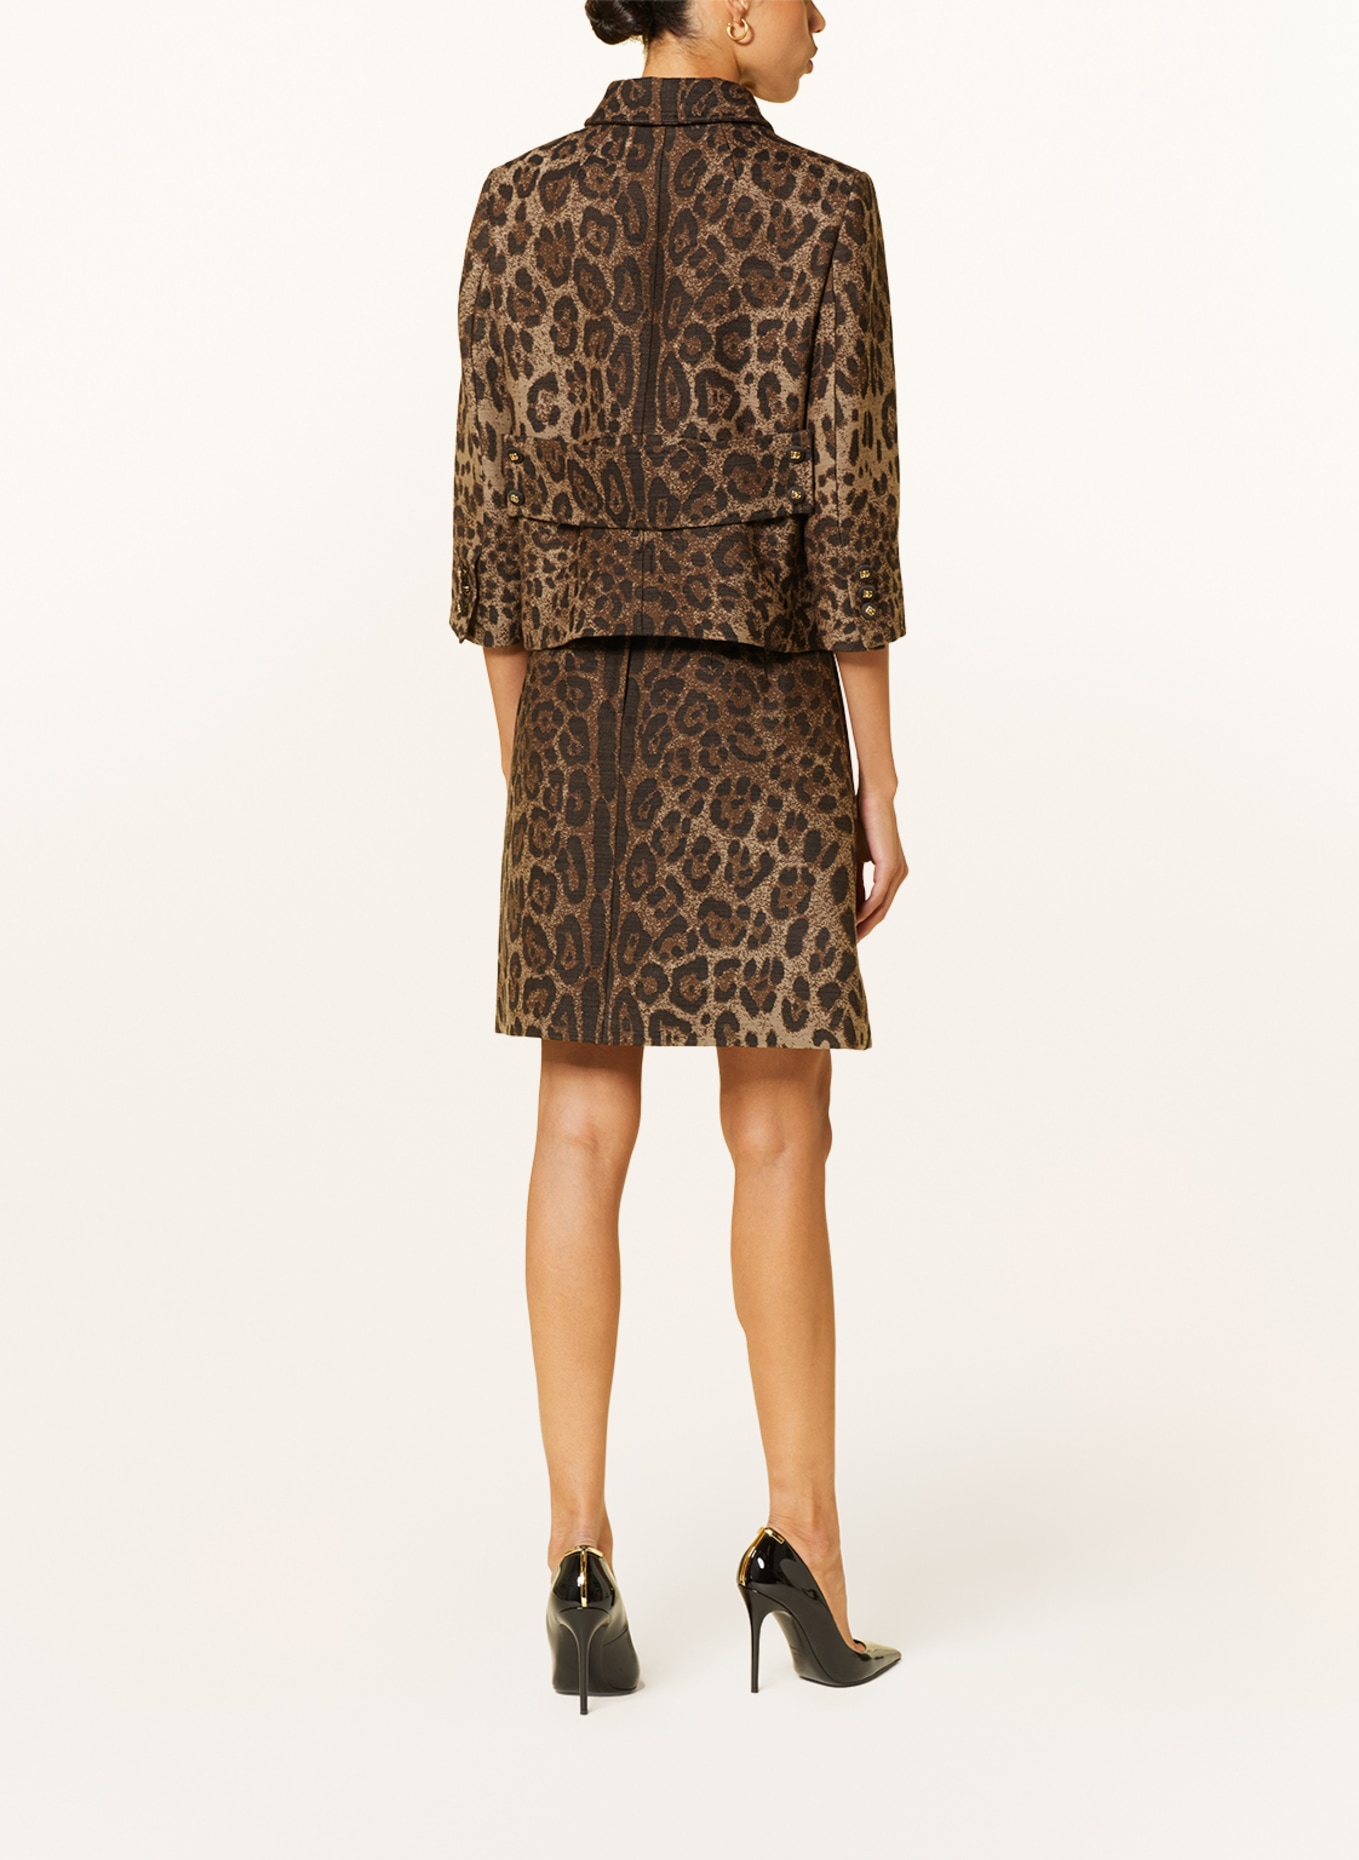 DOLCE & GABBANA Jacquard jacket with 3/4 sleeves, Color: BROWN/ DARK BROWN/ LIGHT BROWN (Image 3)